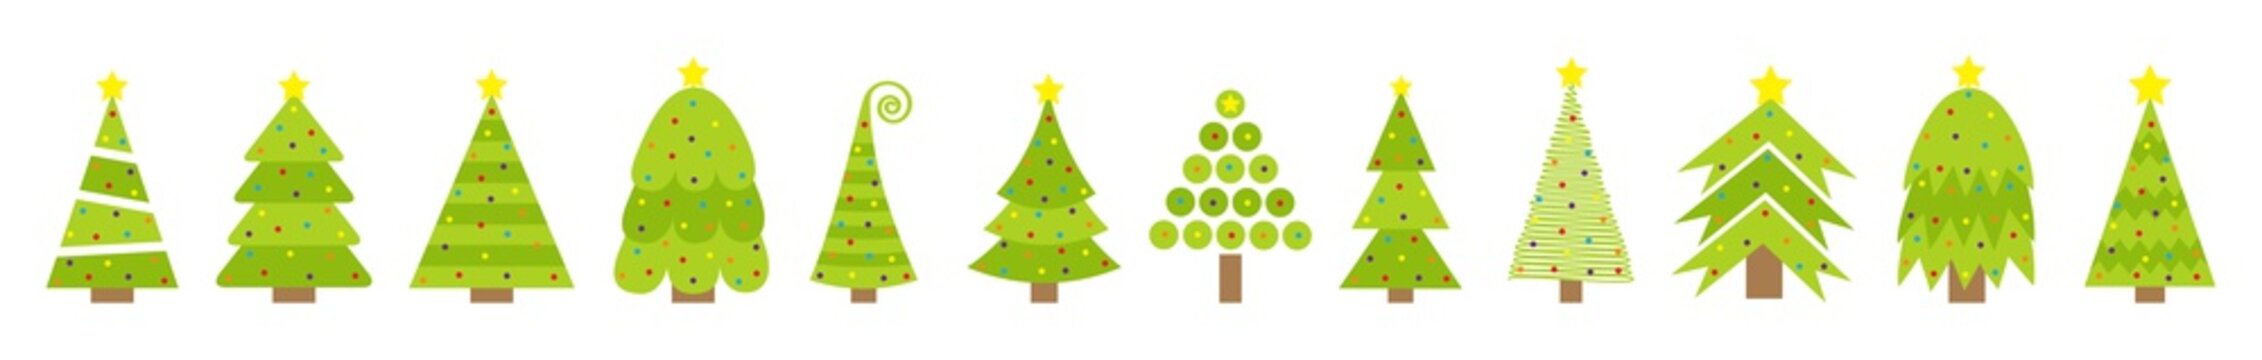 Merry Christmas Fir tree icon line set. Round ball light bulb. Yellow star. Cute cartoon green different triangle simple shape form. White background. Isolated. Flat design.